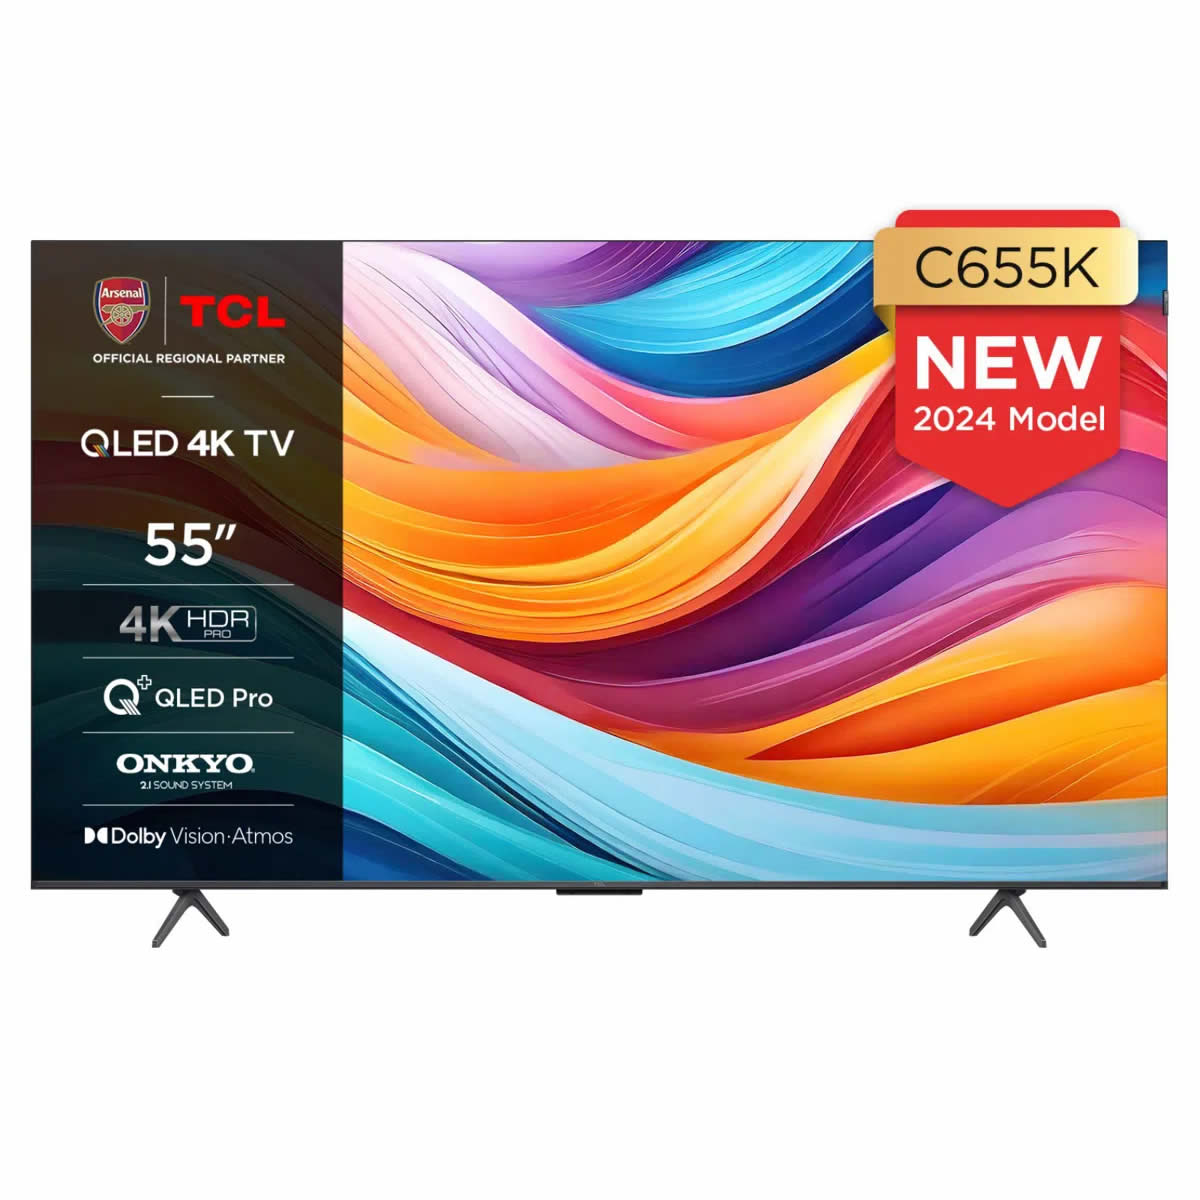 TCL 55inch 4K QLED PRO SMART TV WiFi Freeview HD Google